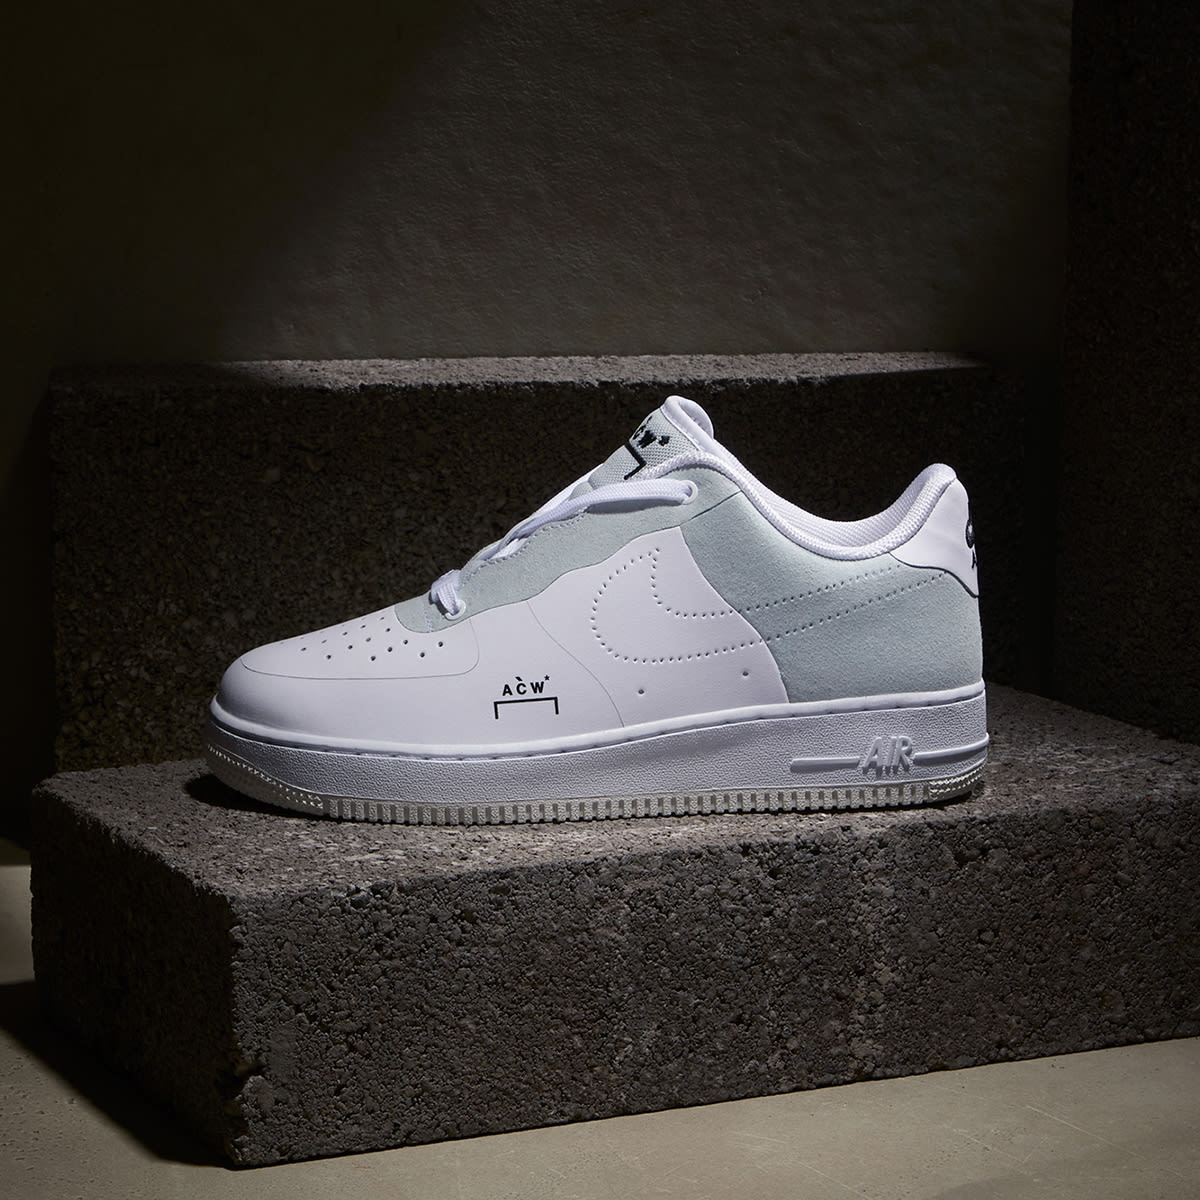 Nike x ACW Air Force 1 (White, Black & Light Grey) | END. Launches